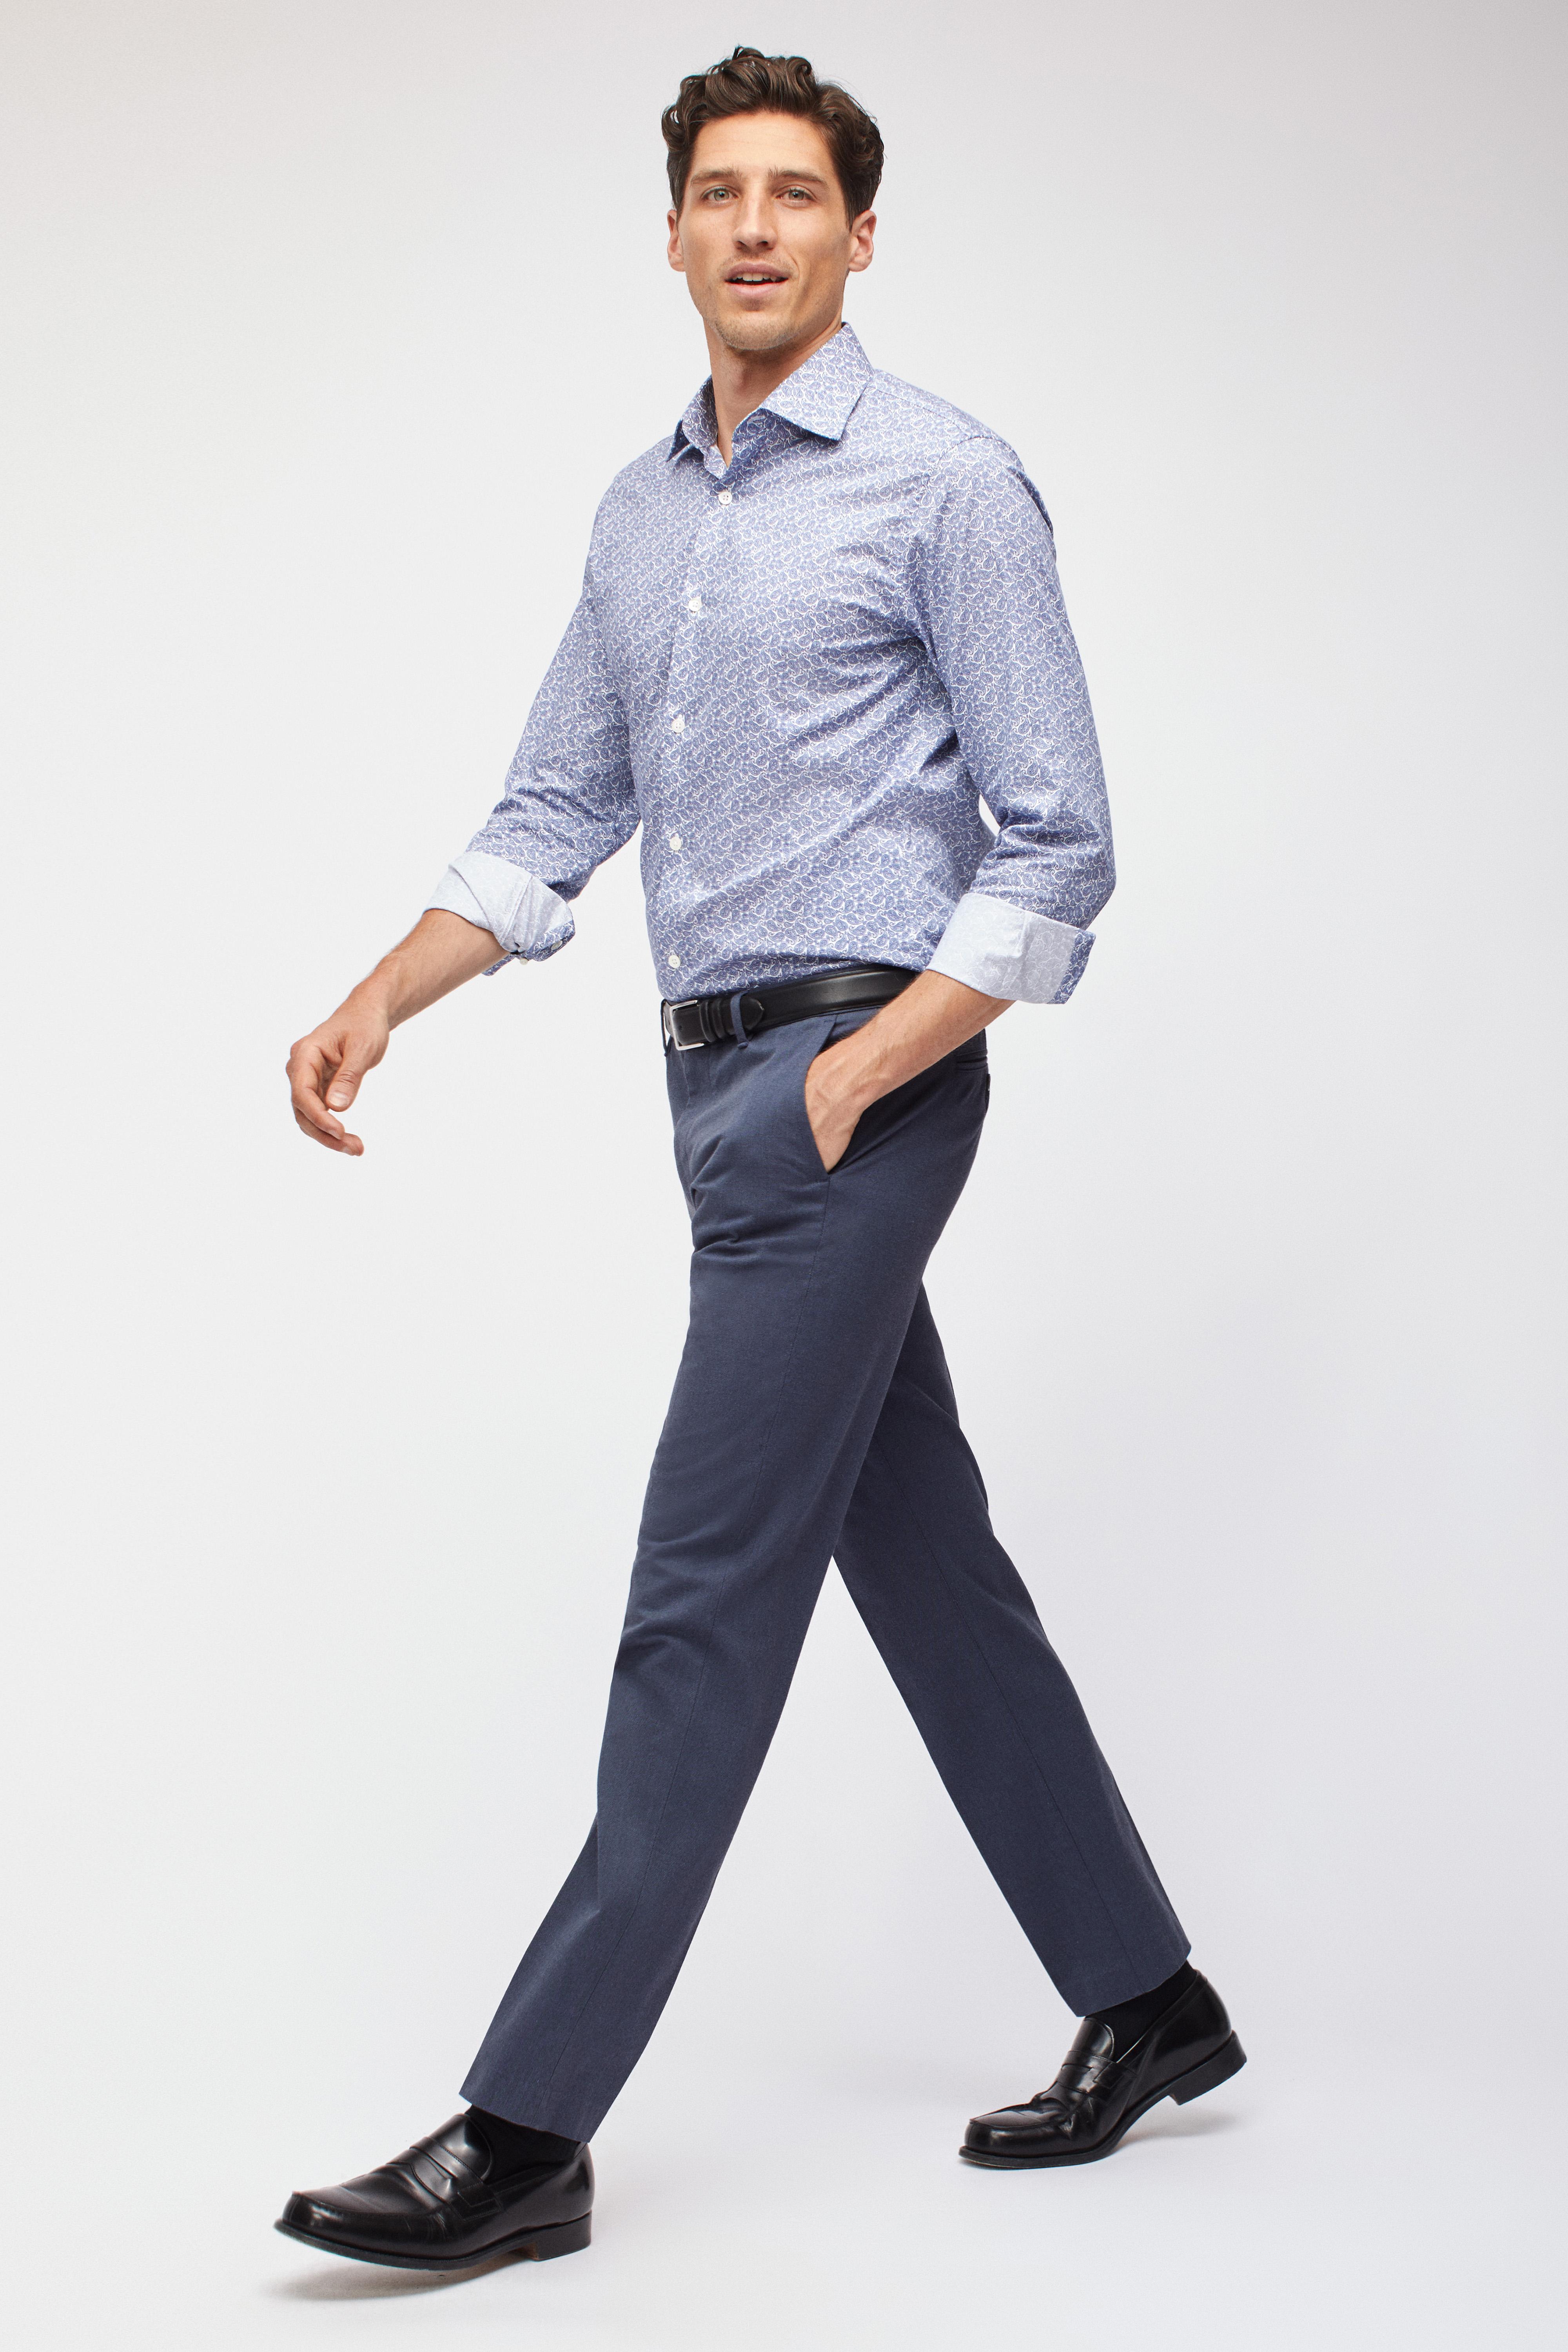 Bonobos Cotton Stretch Weekday Warrior Dress Pants in Blue for Men - Lyst